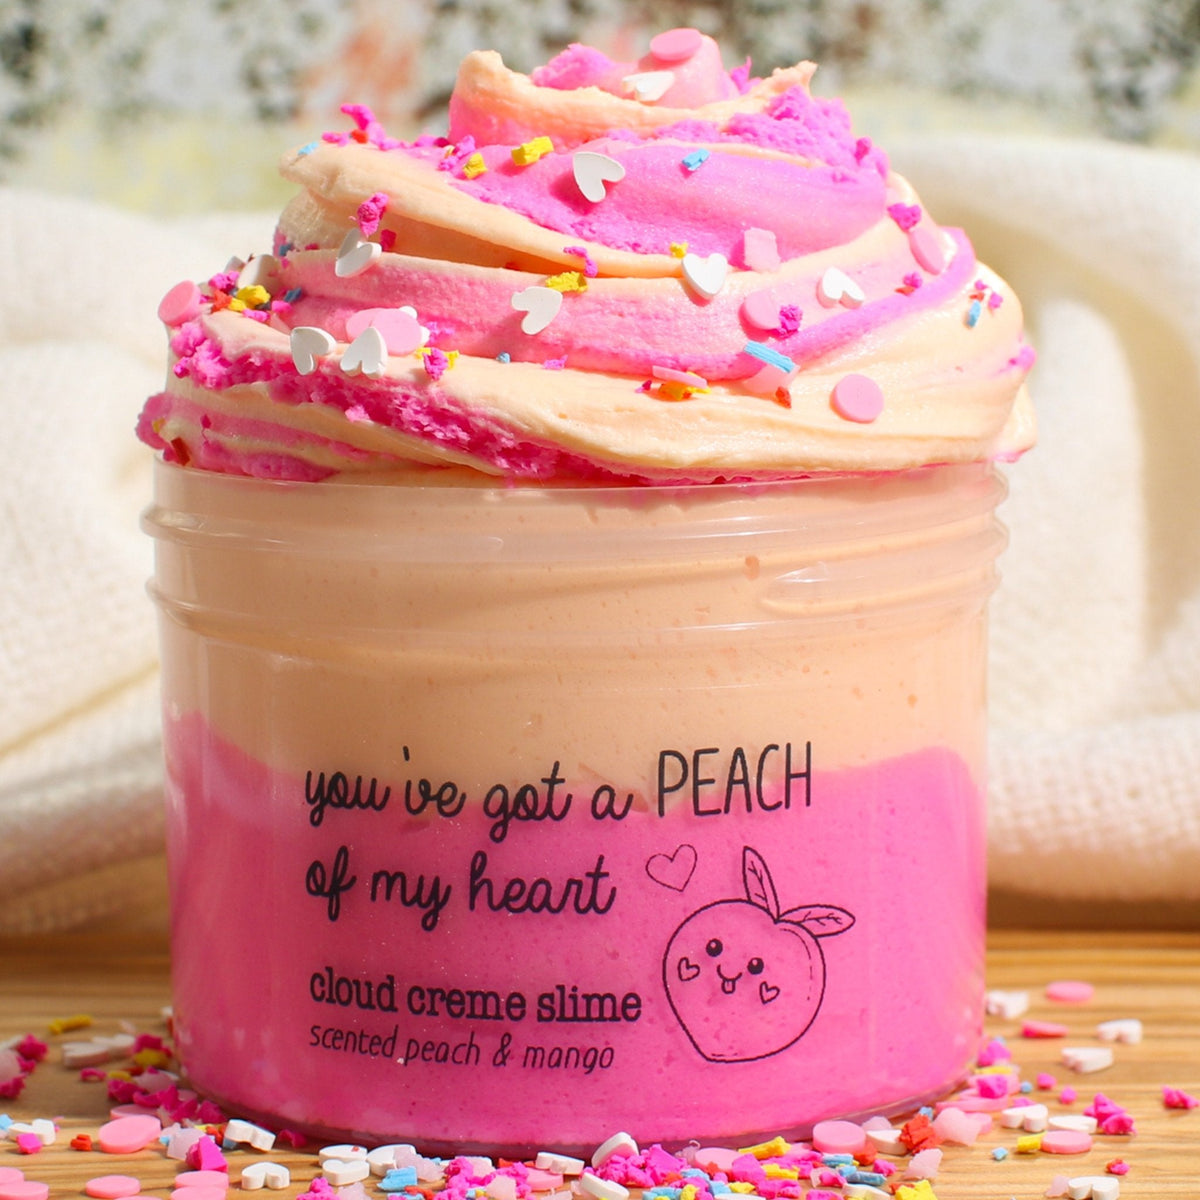 You Got A Peach Of My Heart Cloud Creme Pink Orange Sprinkles Butter Slime Fantasies Shop 9oz Front View